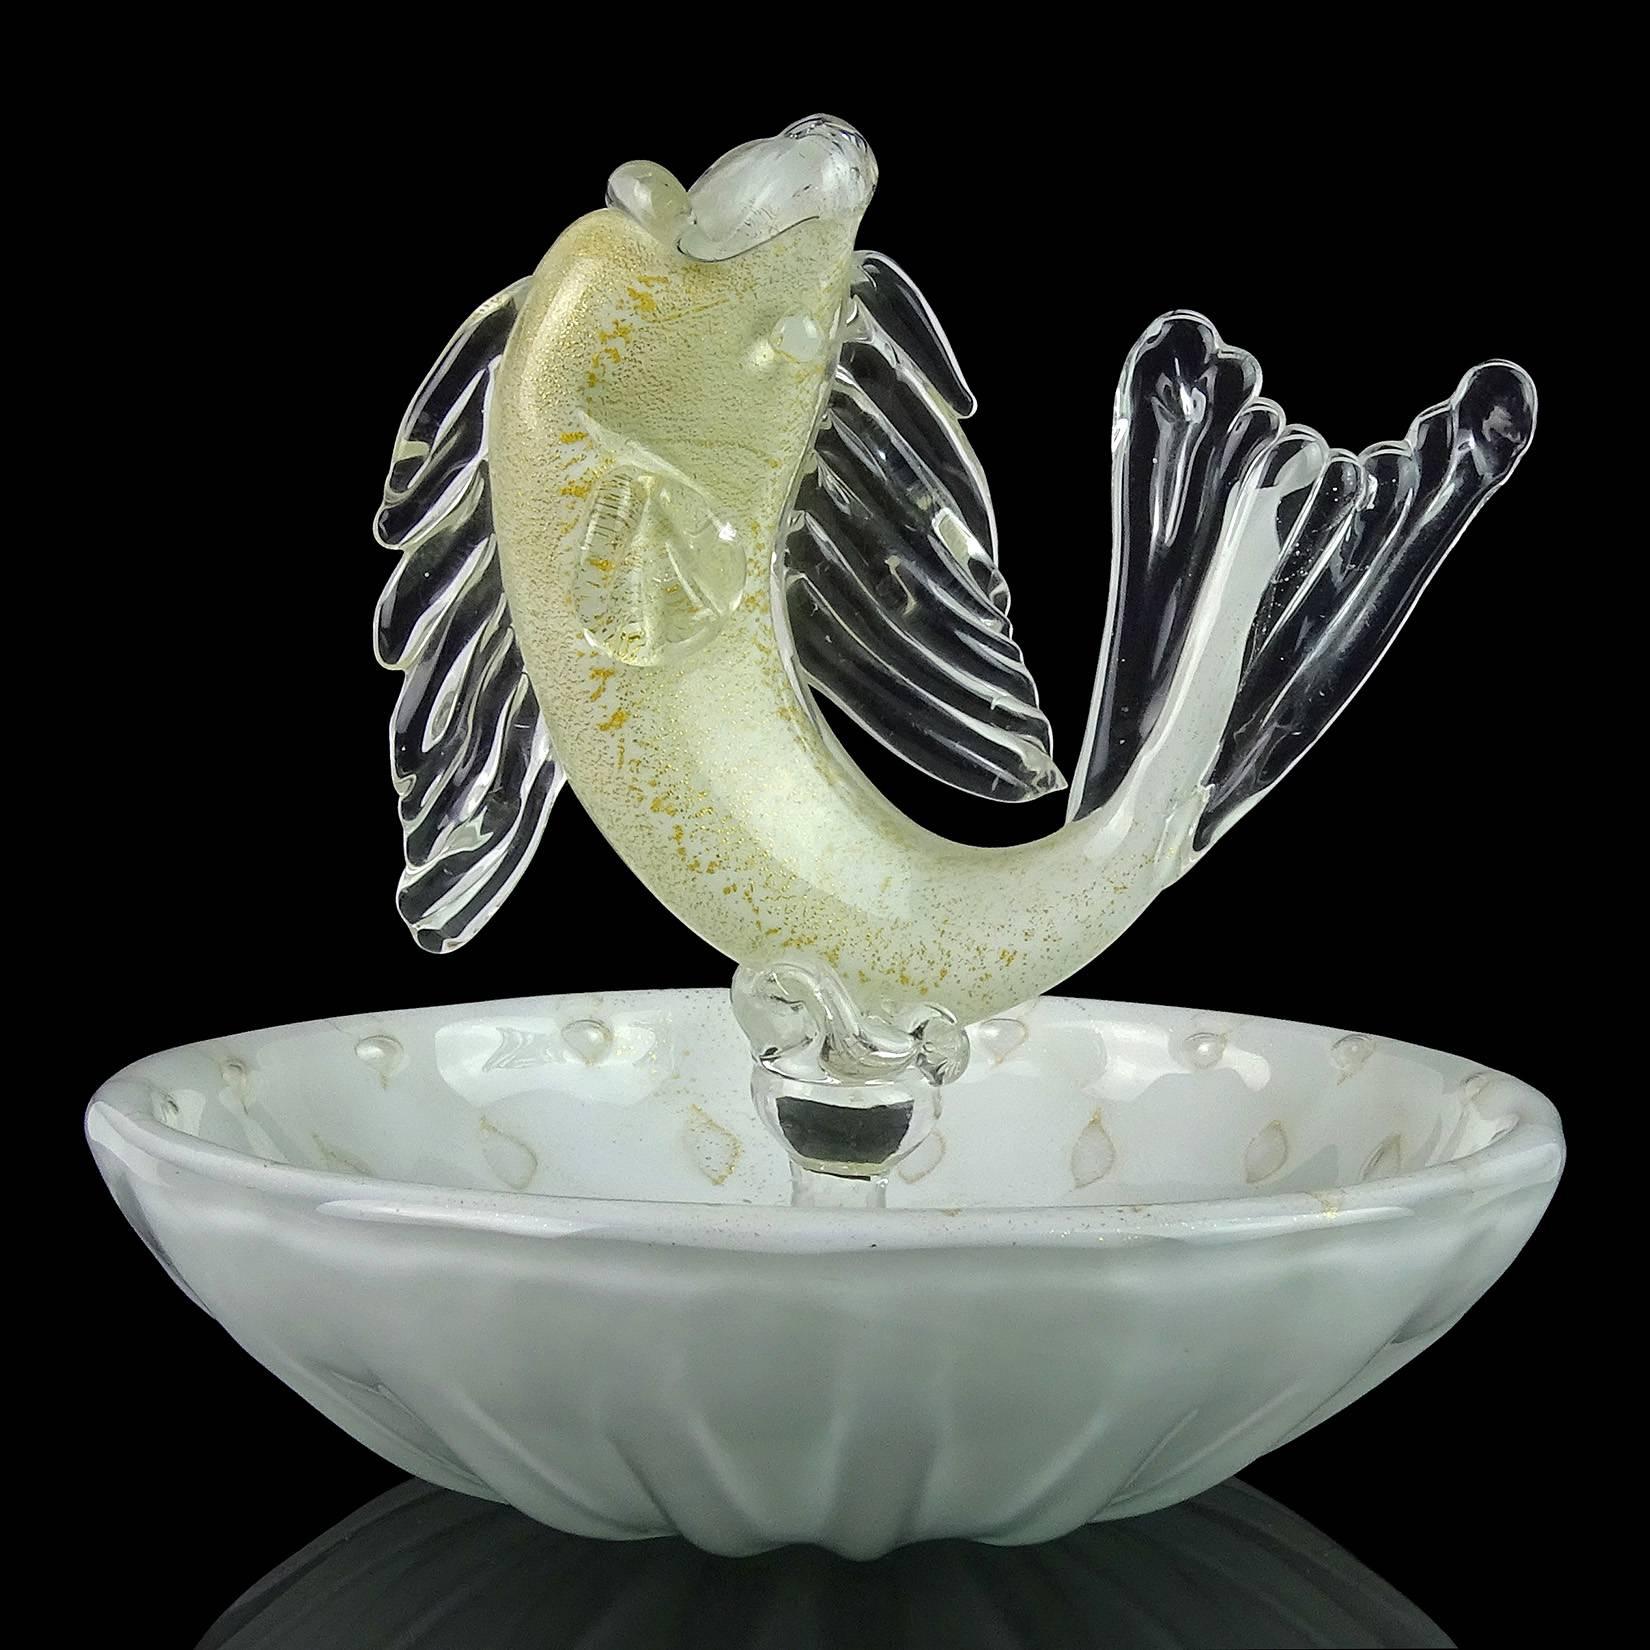 Beautiful vintage Murano hand blown controlled bubbles and white fish Italian art glass decorative bowl, vide-poche. Attributed to designer Alfredo Barbini, for Salviati. Profusely covered in gold leaf. Would make a great candy dish or jewelry /